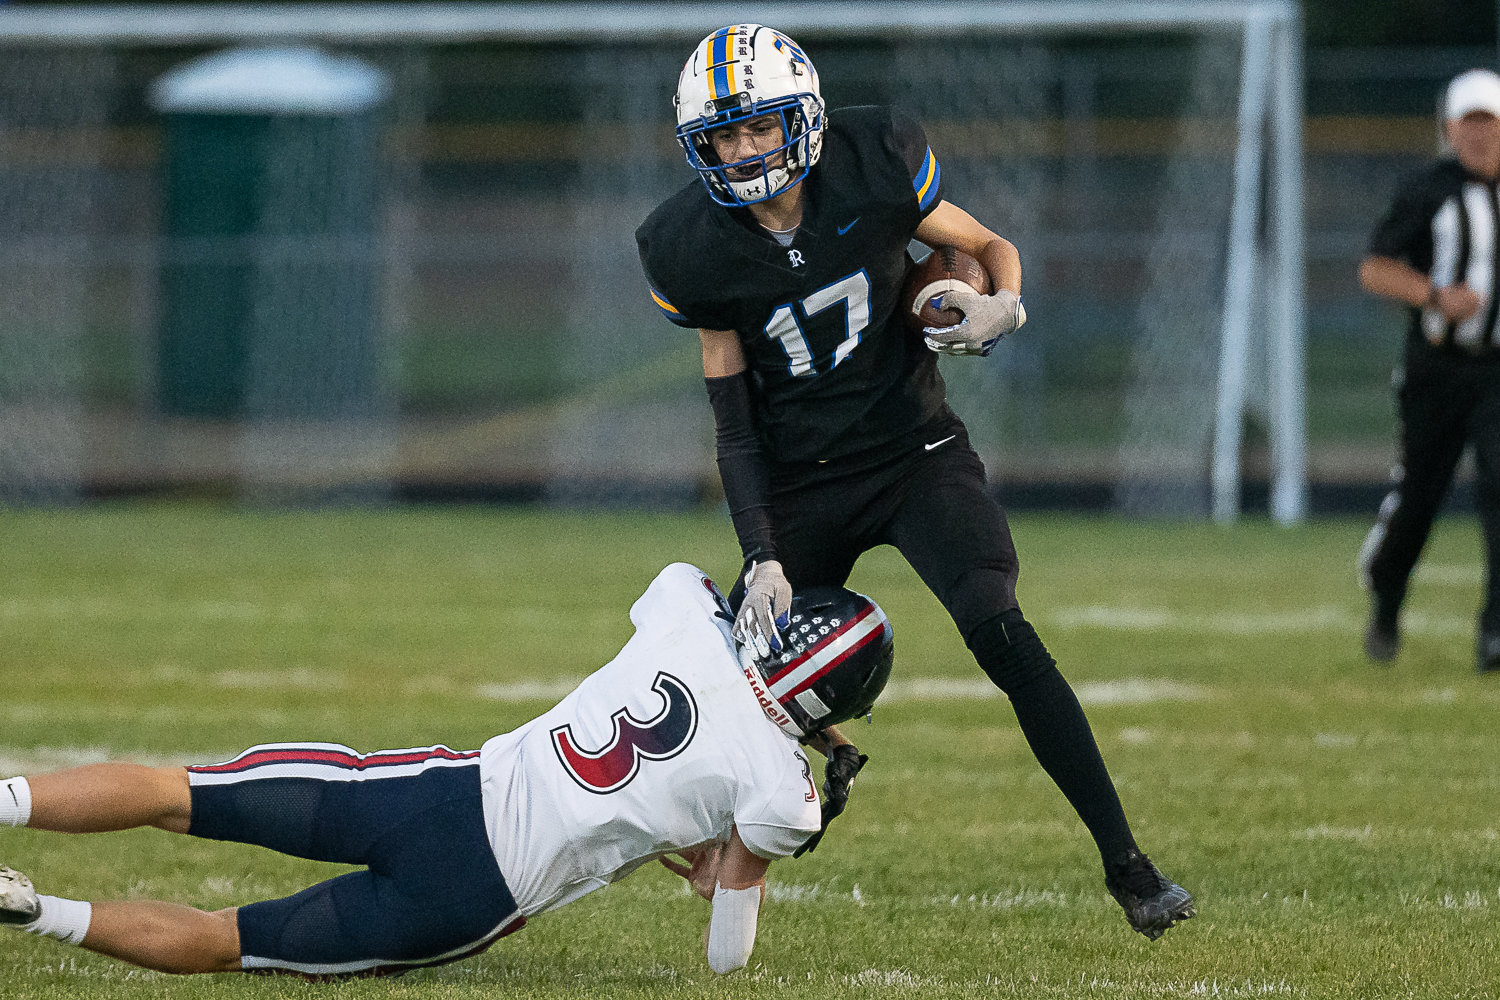 Rochester's Ethan Rodriguez eludes a tackler on a kickoff against Black Hills Sept. 16.